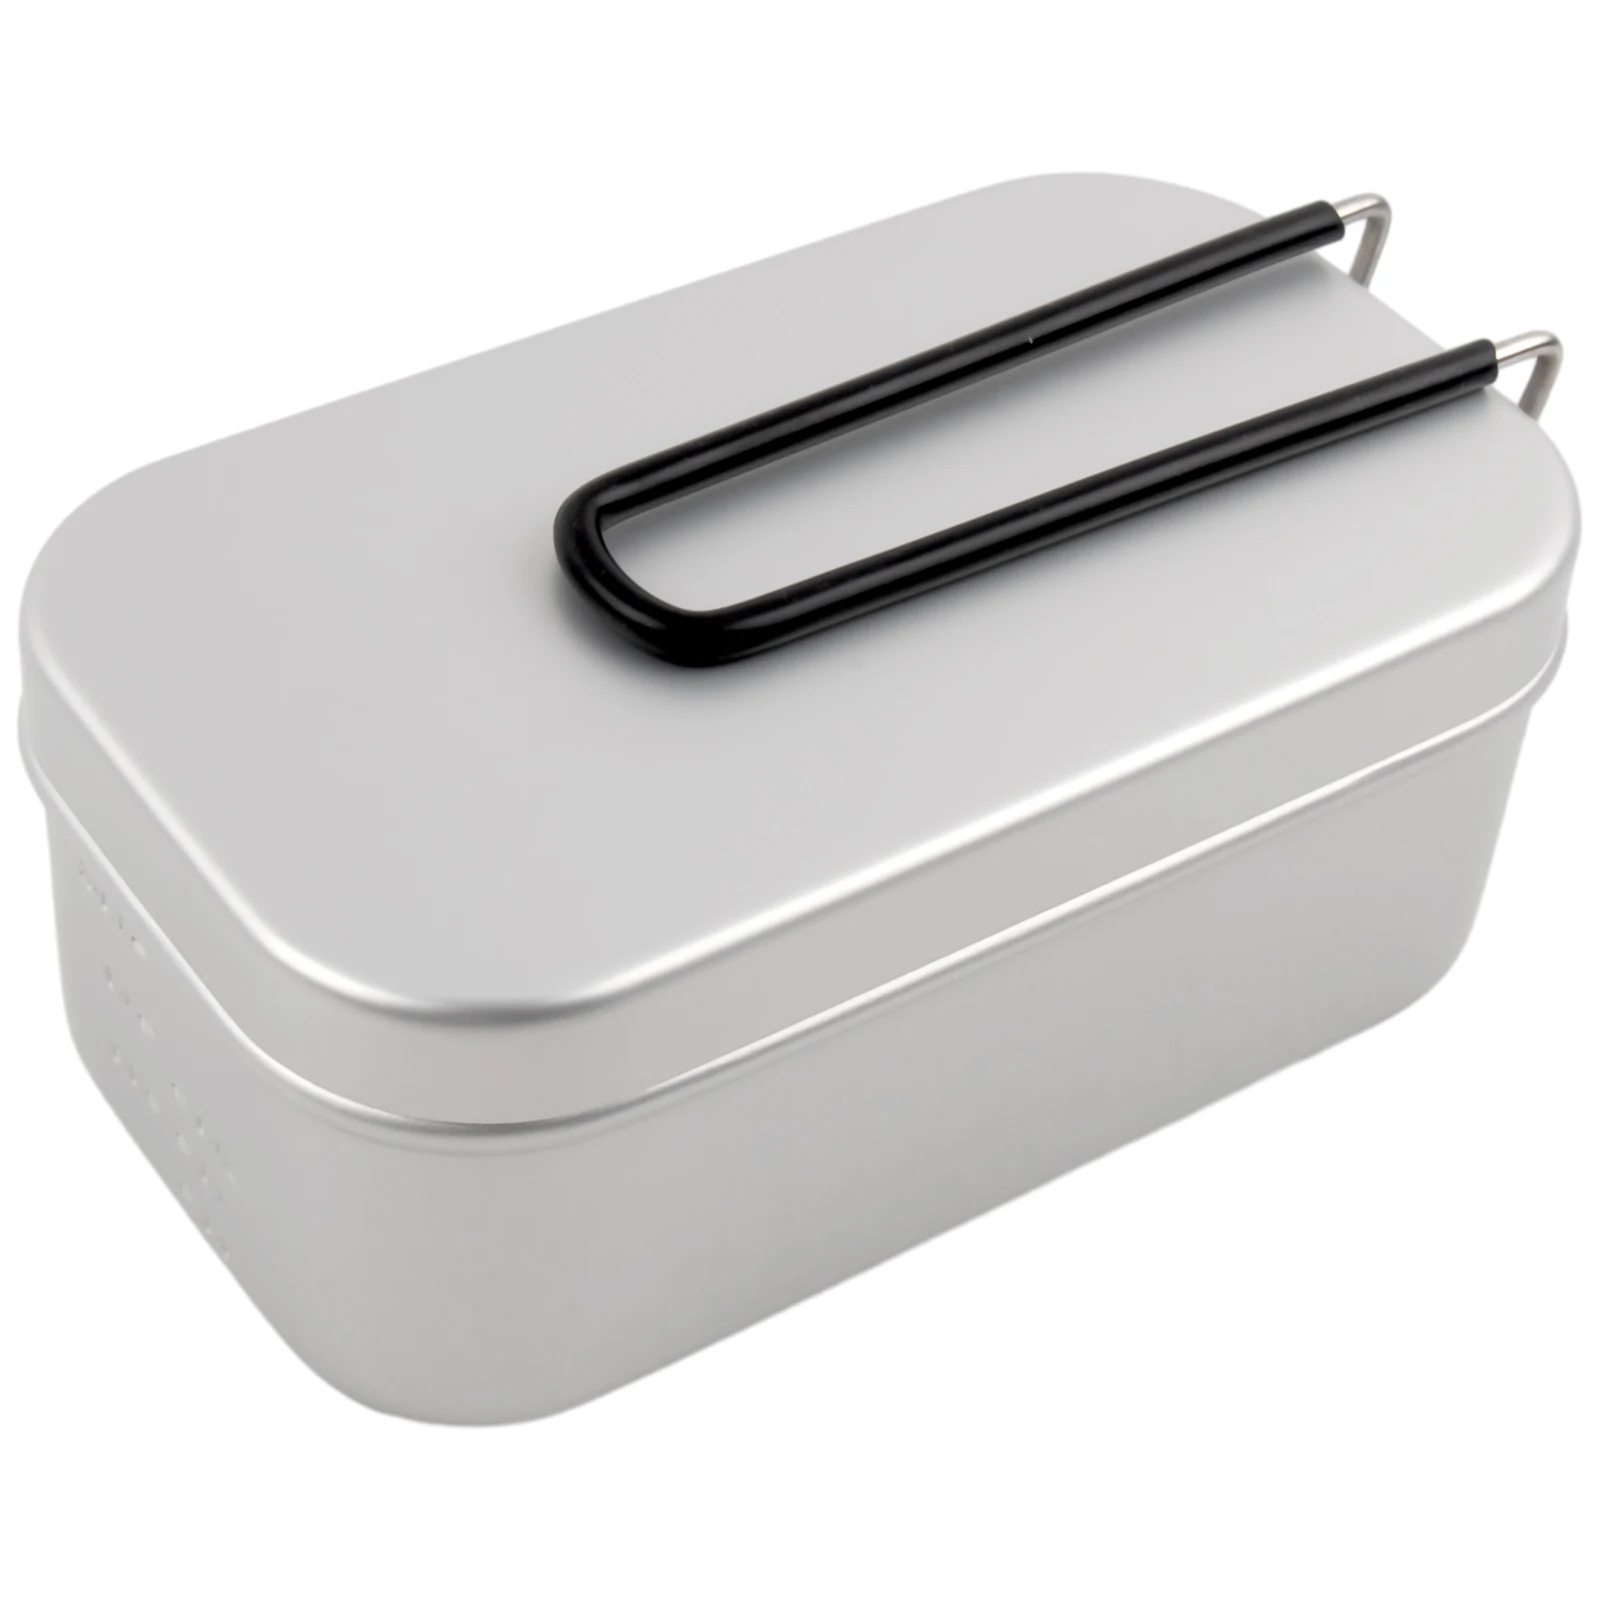 

Bento Box Lunch Box With Handle 2-in-1 Aluminium Cooking Cookware Folding Food Storage High Quality For Picnic